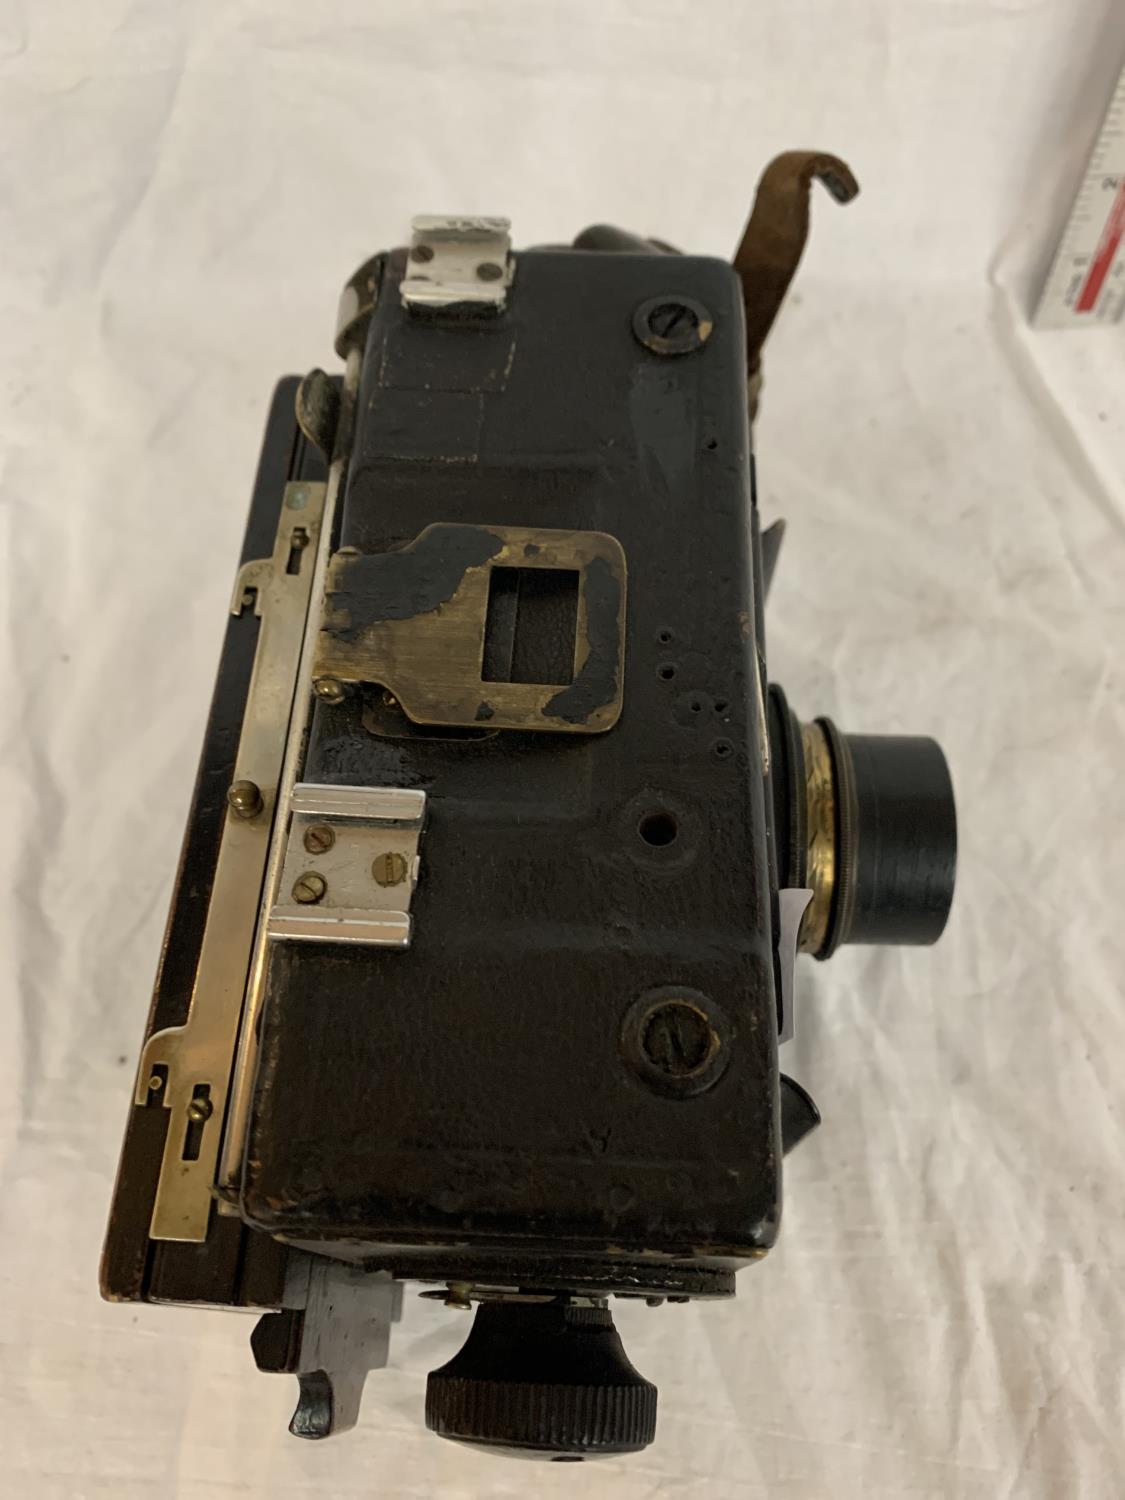 A VINTAGE ROSS OF LONDON CAMERA WITH DAYLIGHT SLIDE - Image 5 of 6